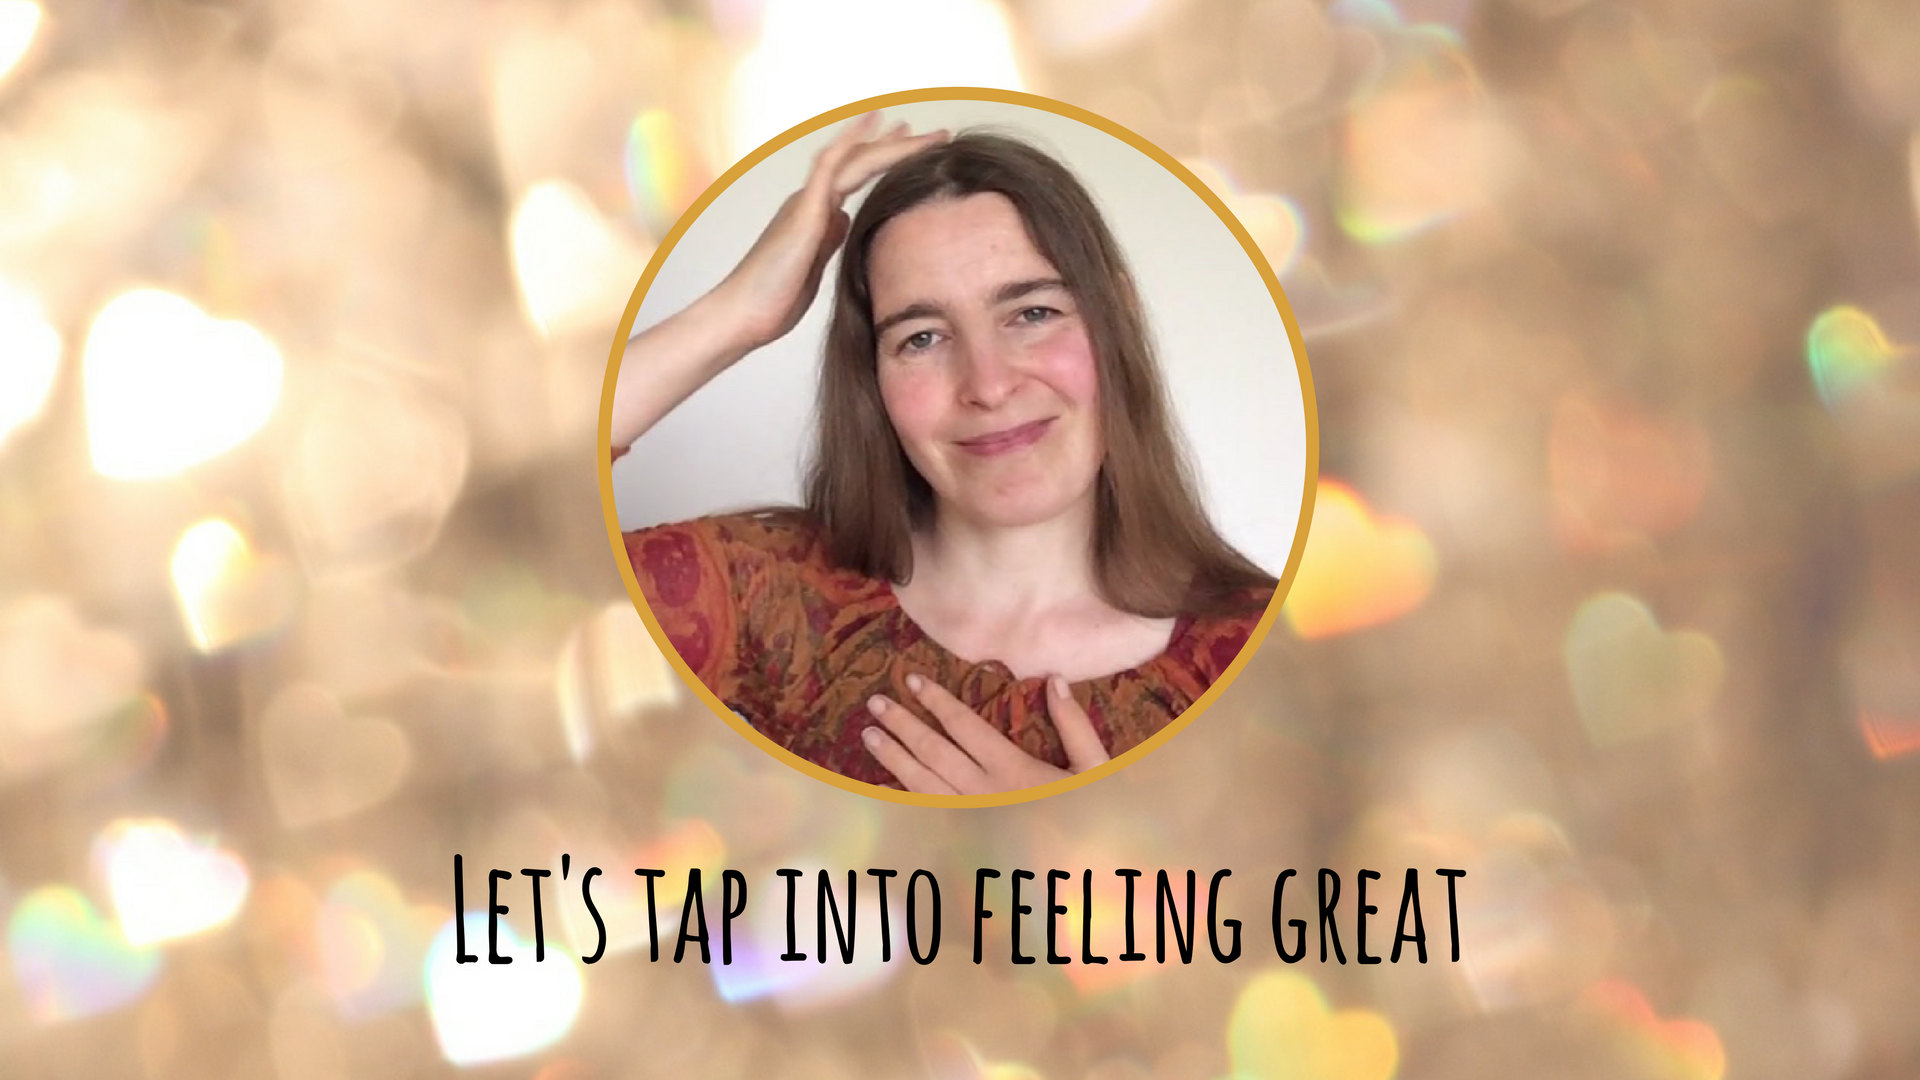 Free Call: Tap into feeling great with Positive EFT